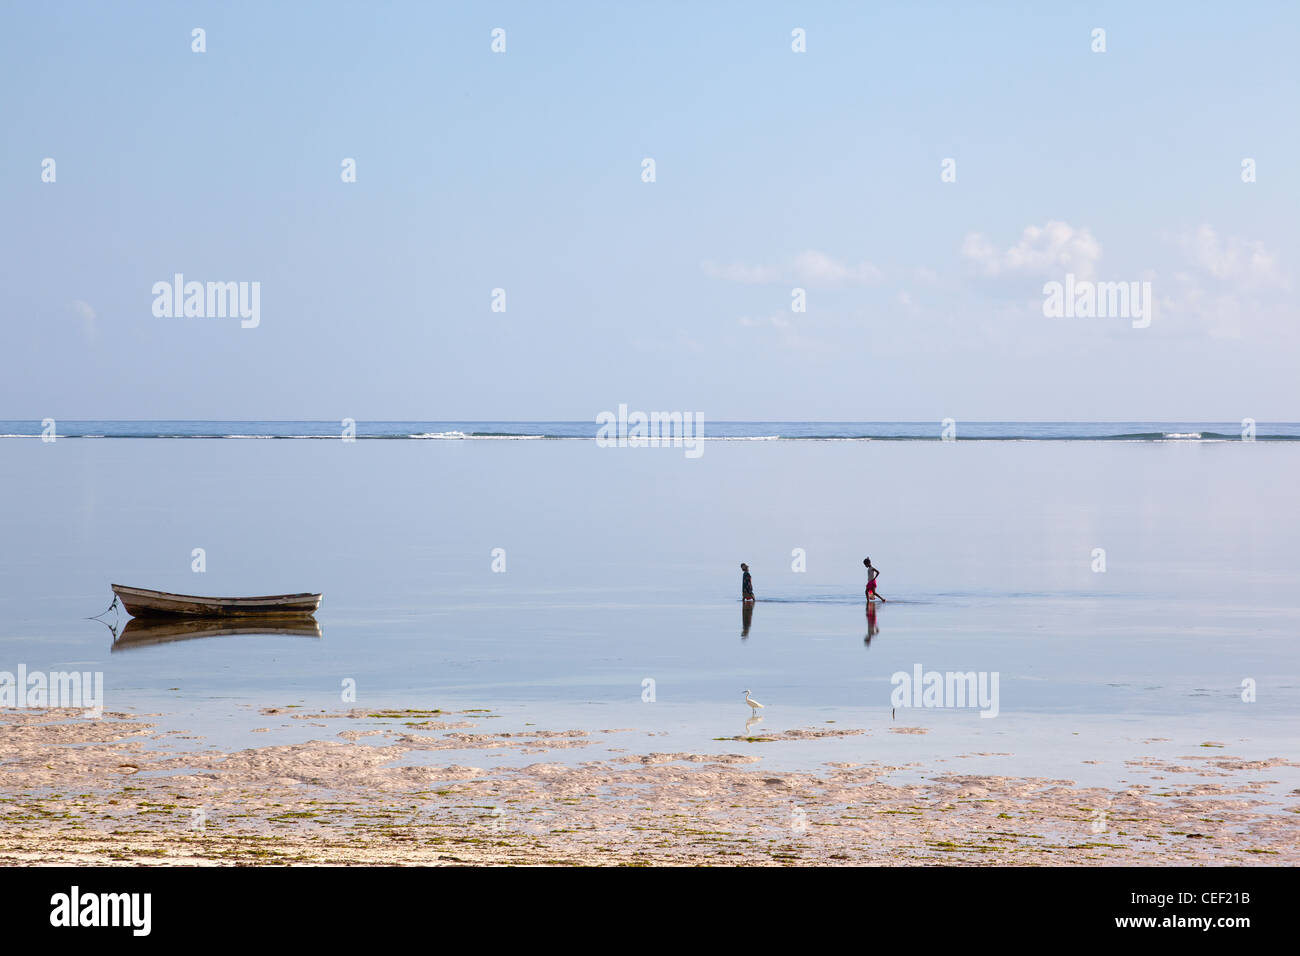 Two Zanzibari village girls going out to catch octopus in the sea at low tide off the coral reef at Bwejuu, Zanzibar Island, Tanzania Stock Photo